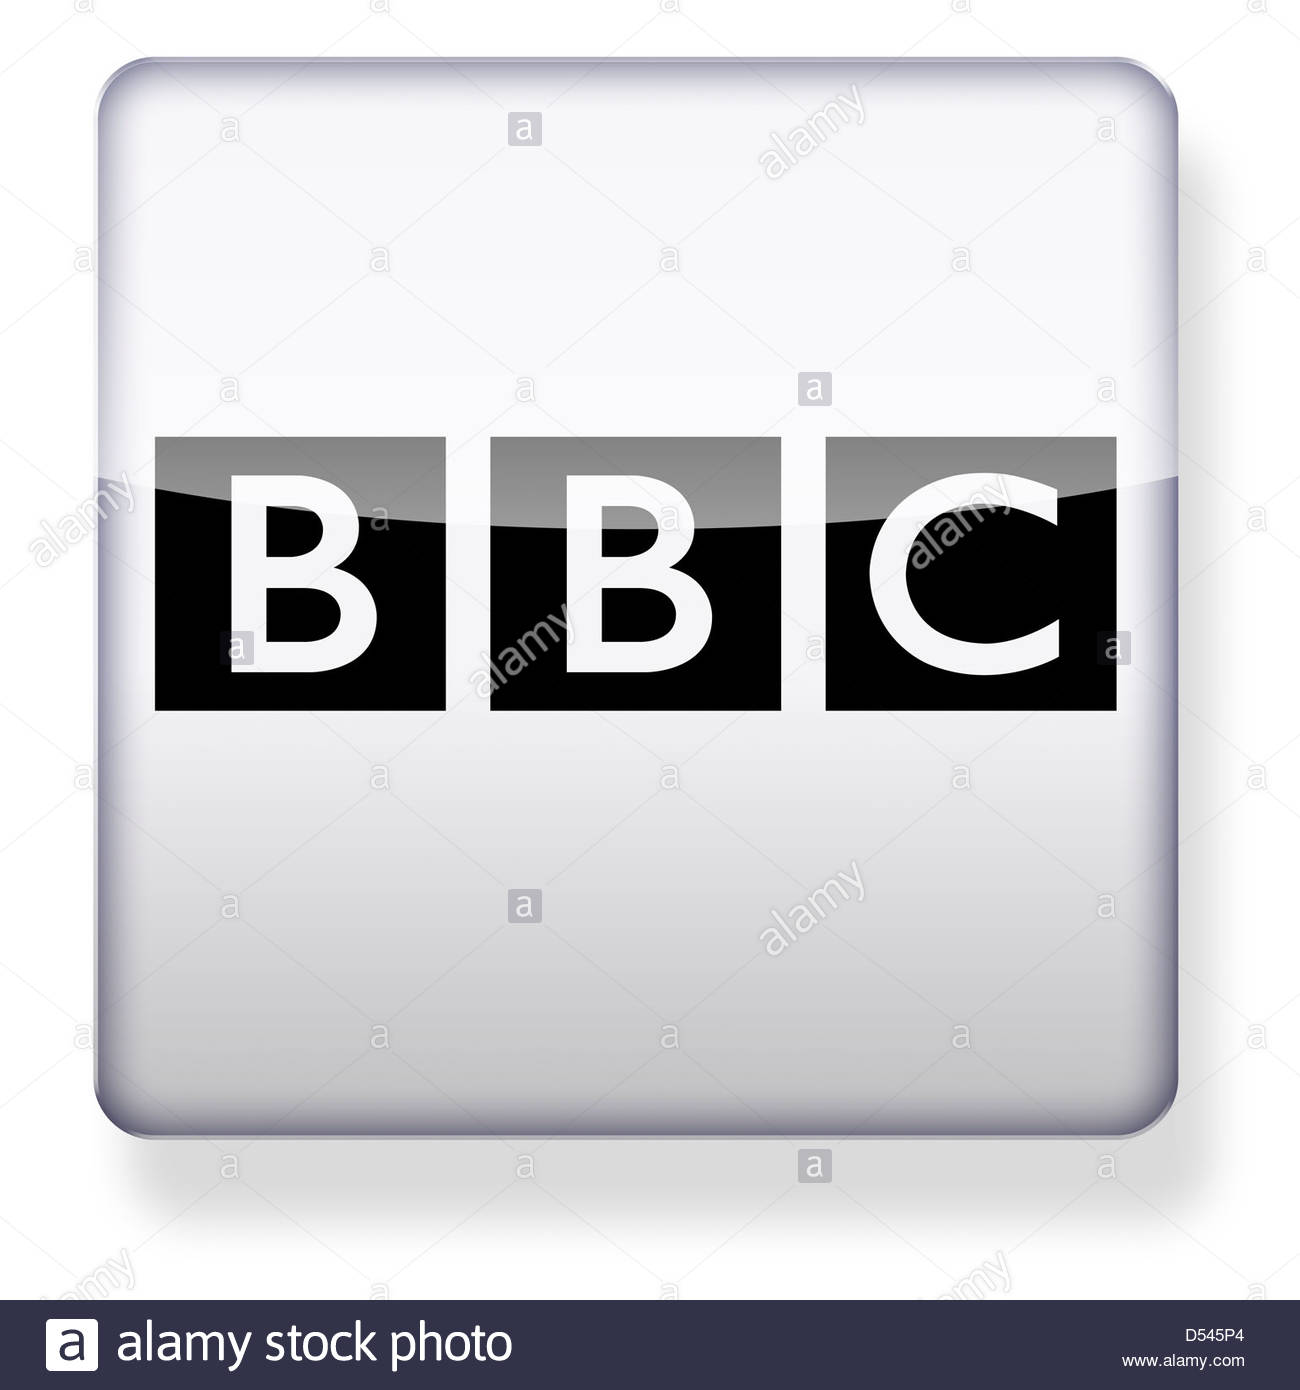 Bbc Icon Free - Social Media  Logos Icons in SVG and PNG - Icon Library